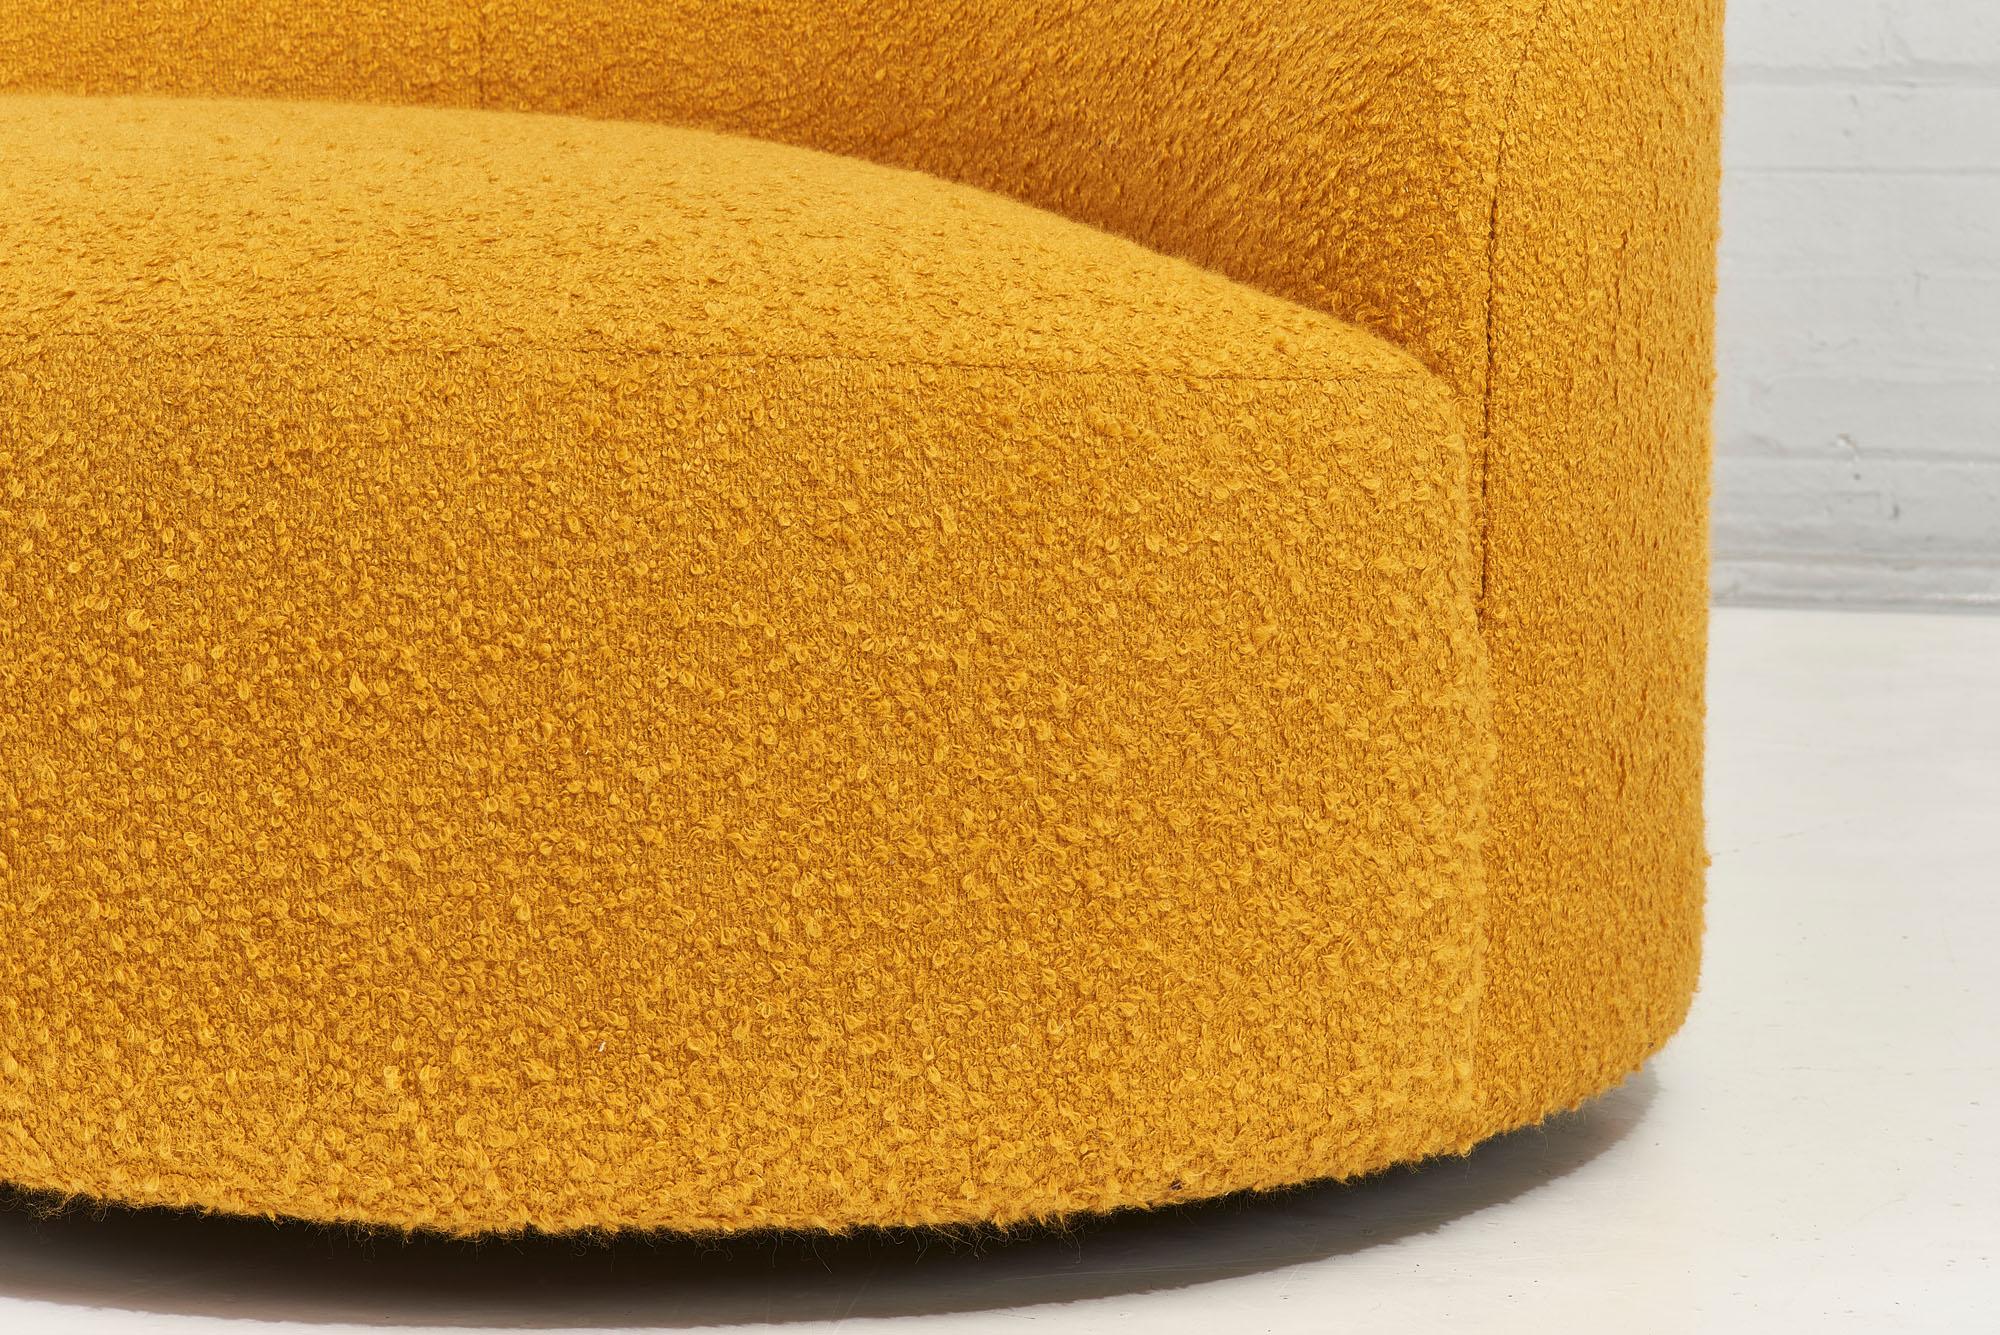 North American Vladimir Kagan Swivel Chaise in Goldenrod Boucle, Preview, 1990